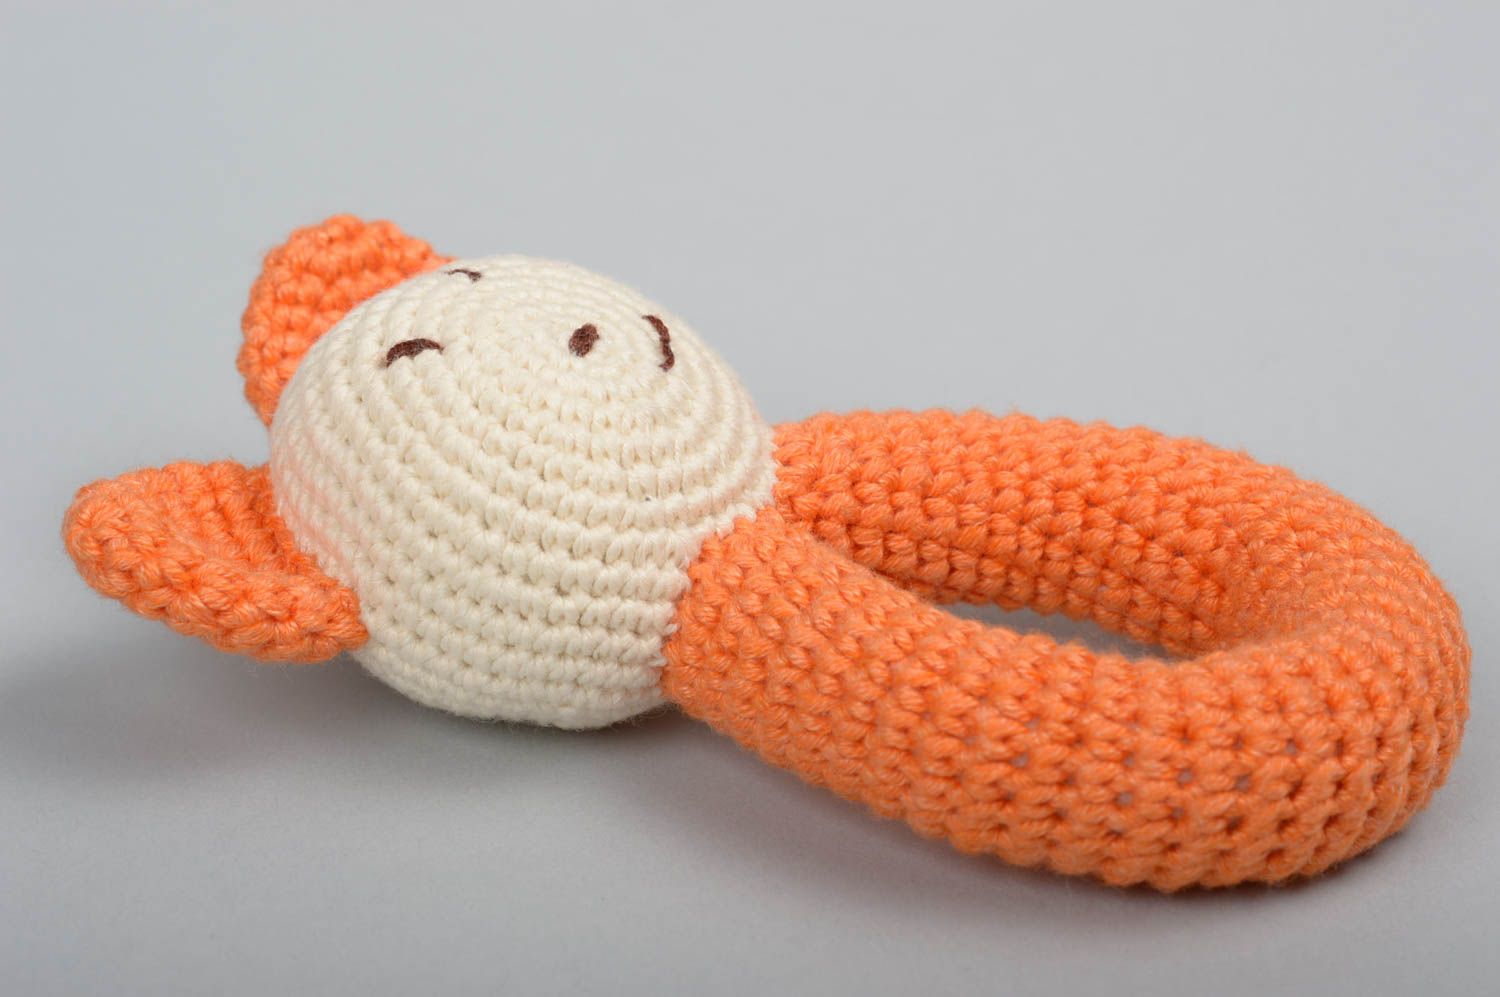 Beautiful handmade crochet toy soft toy for babies stuffed baby toy gift ideas photo 2